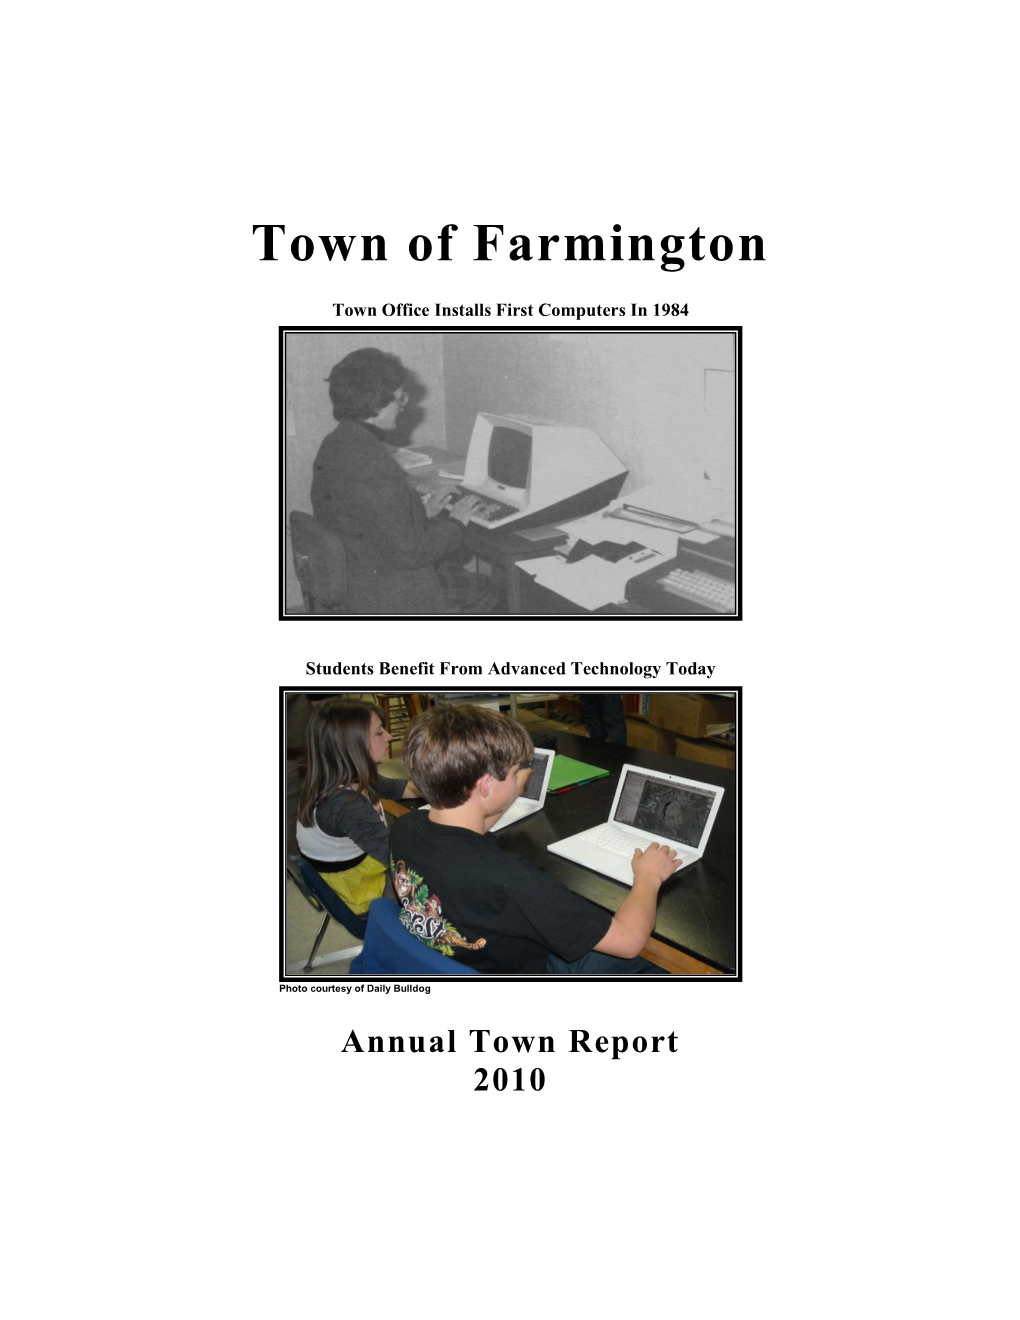 2010 Annual Town Report To